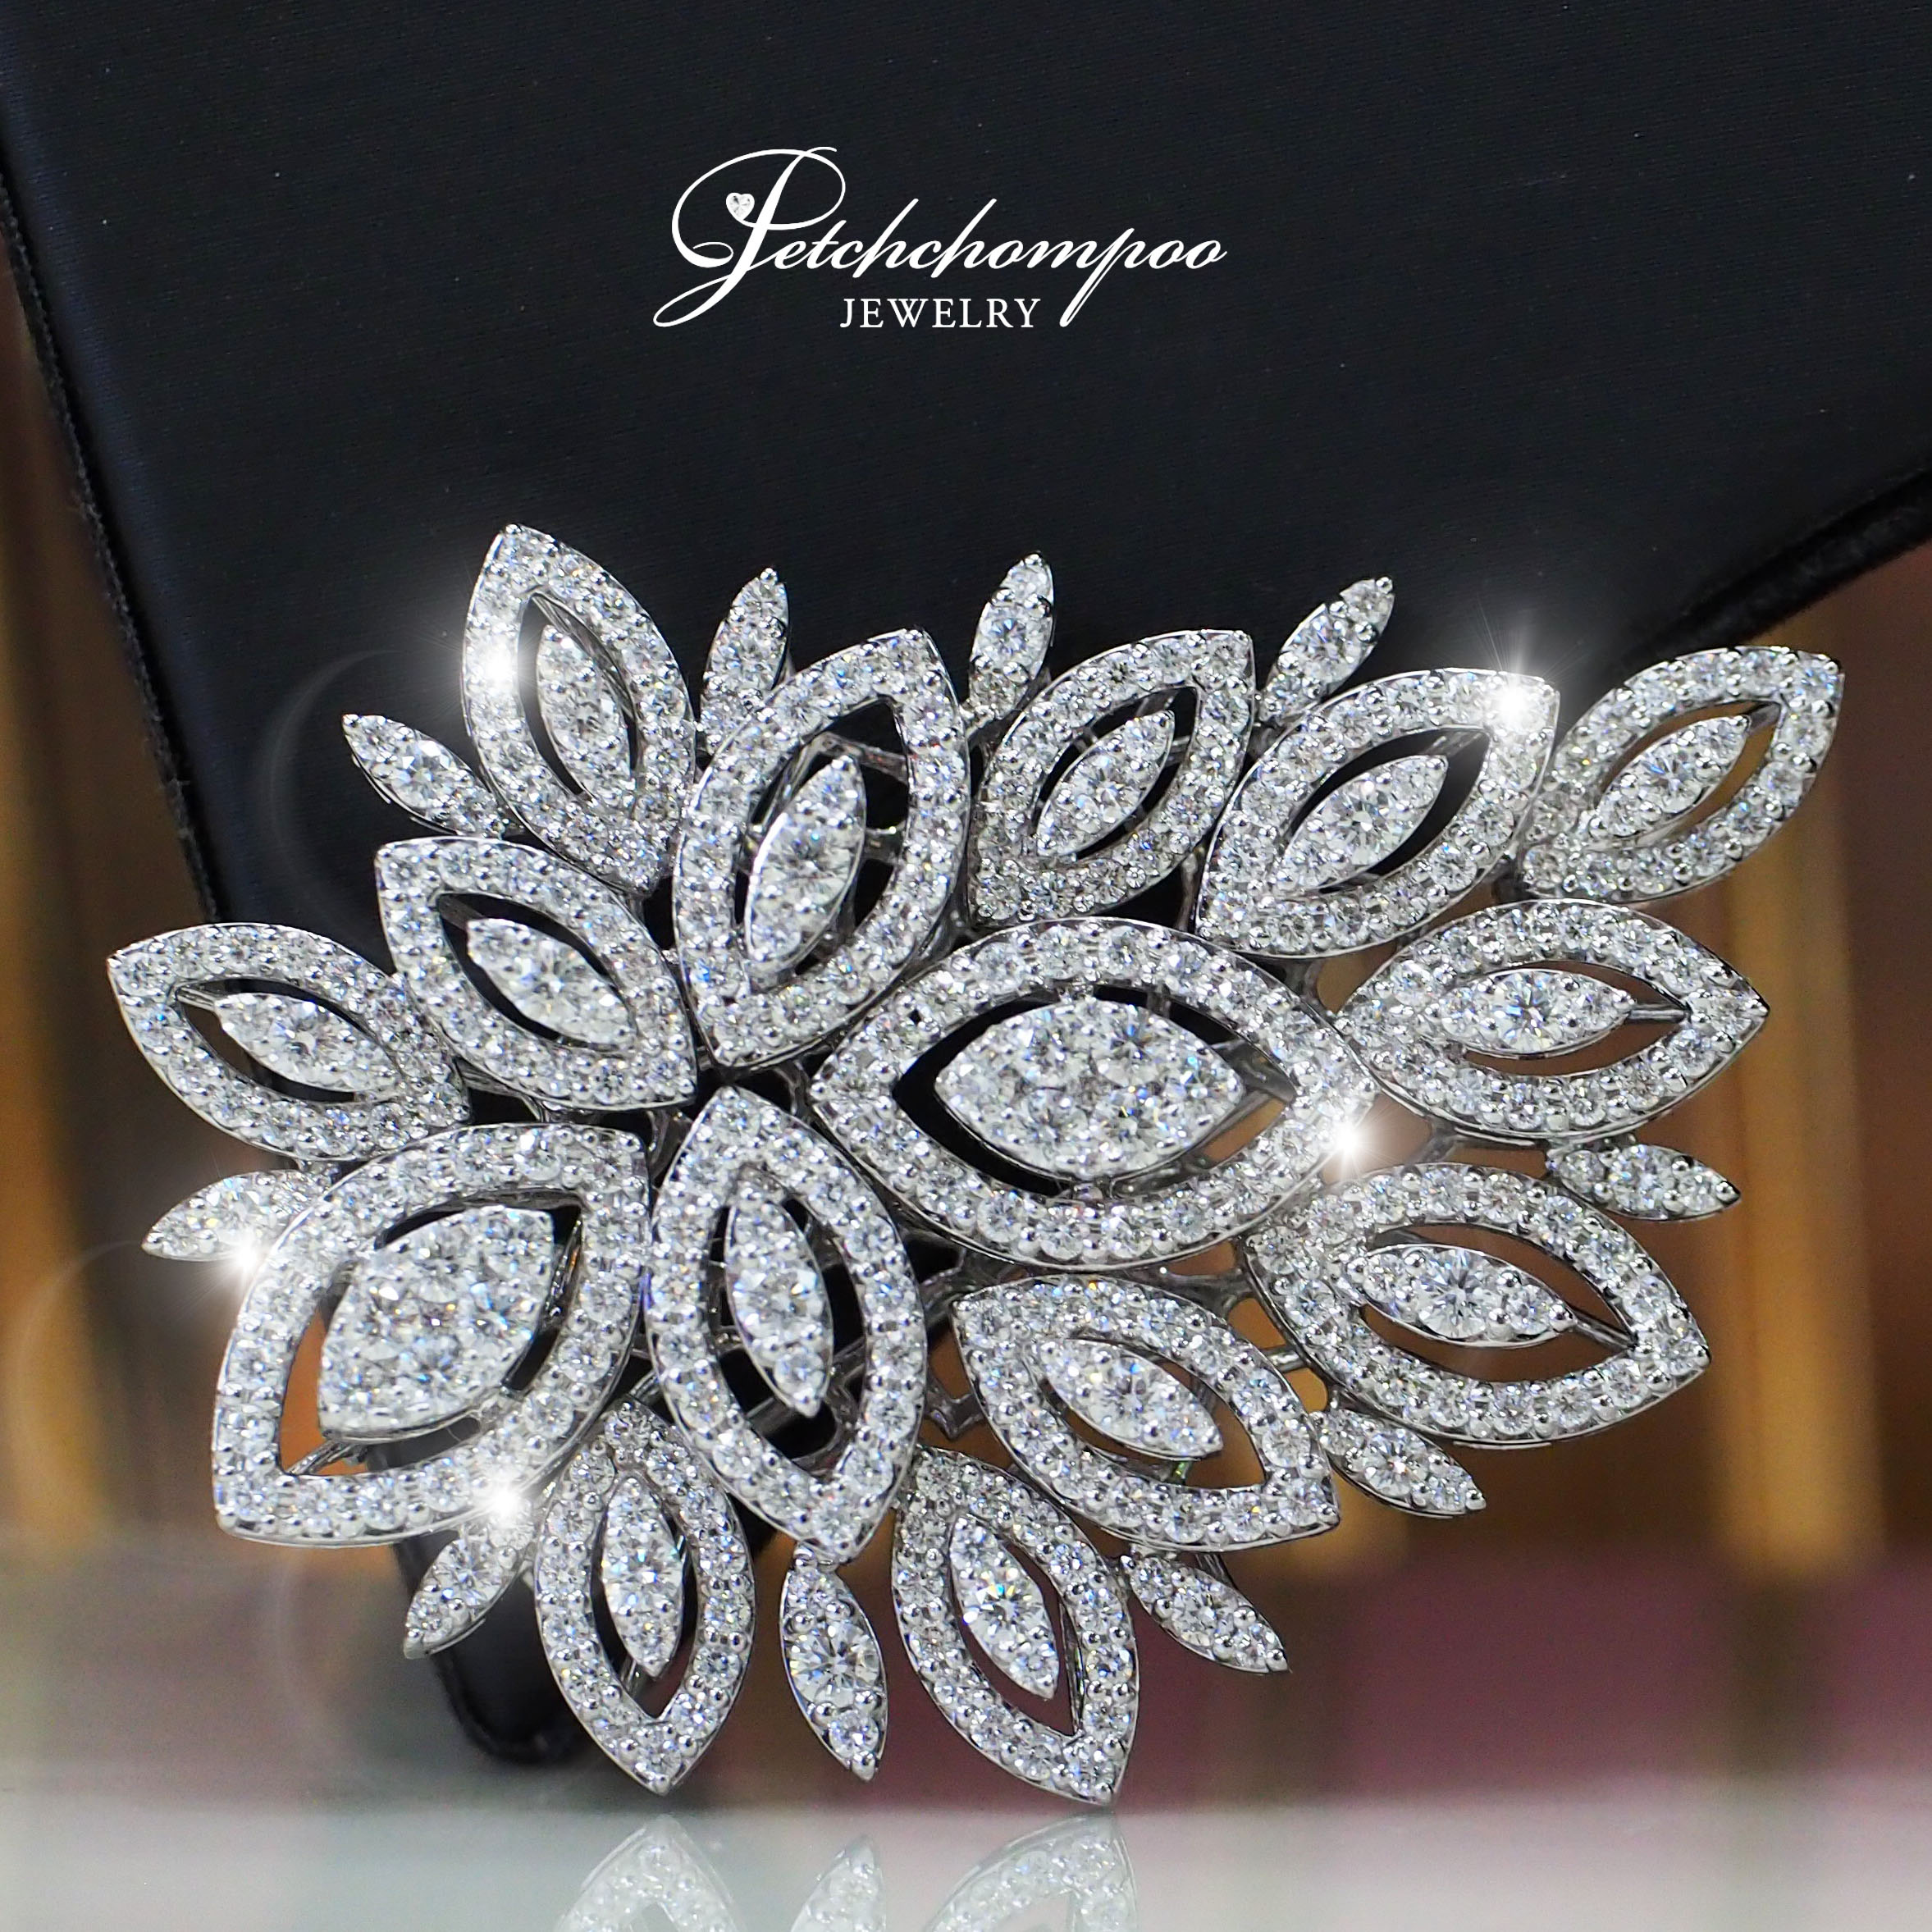 [27022] Diamond pendant and brooch 5.54 ct. Discount 239,000